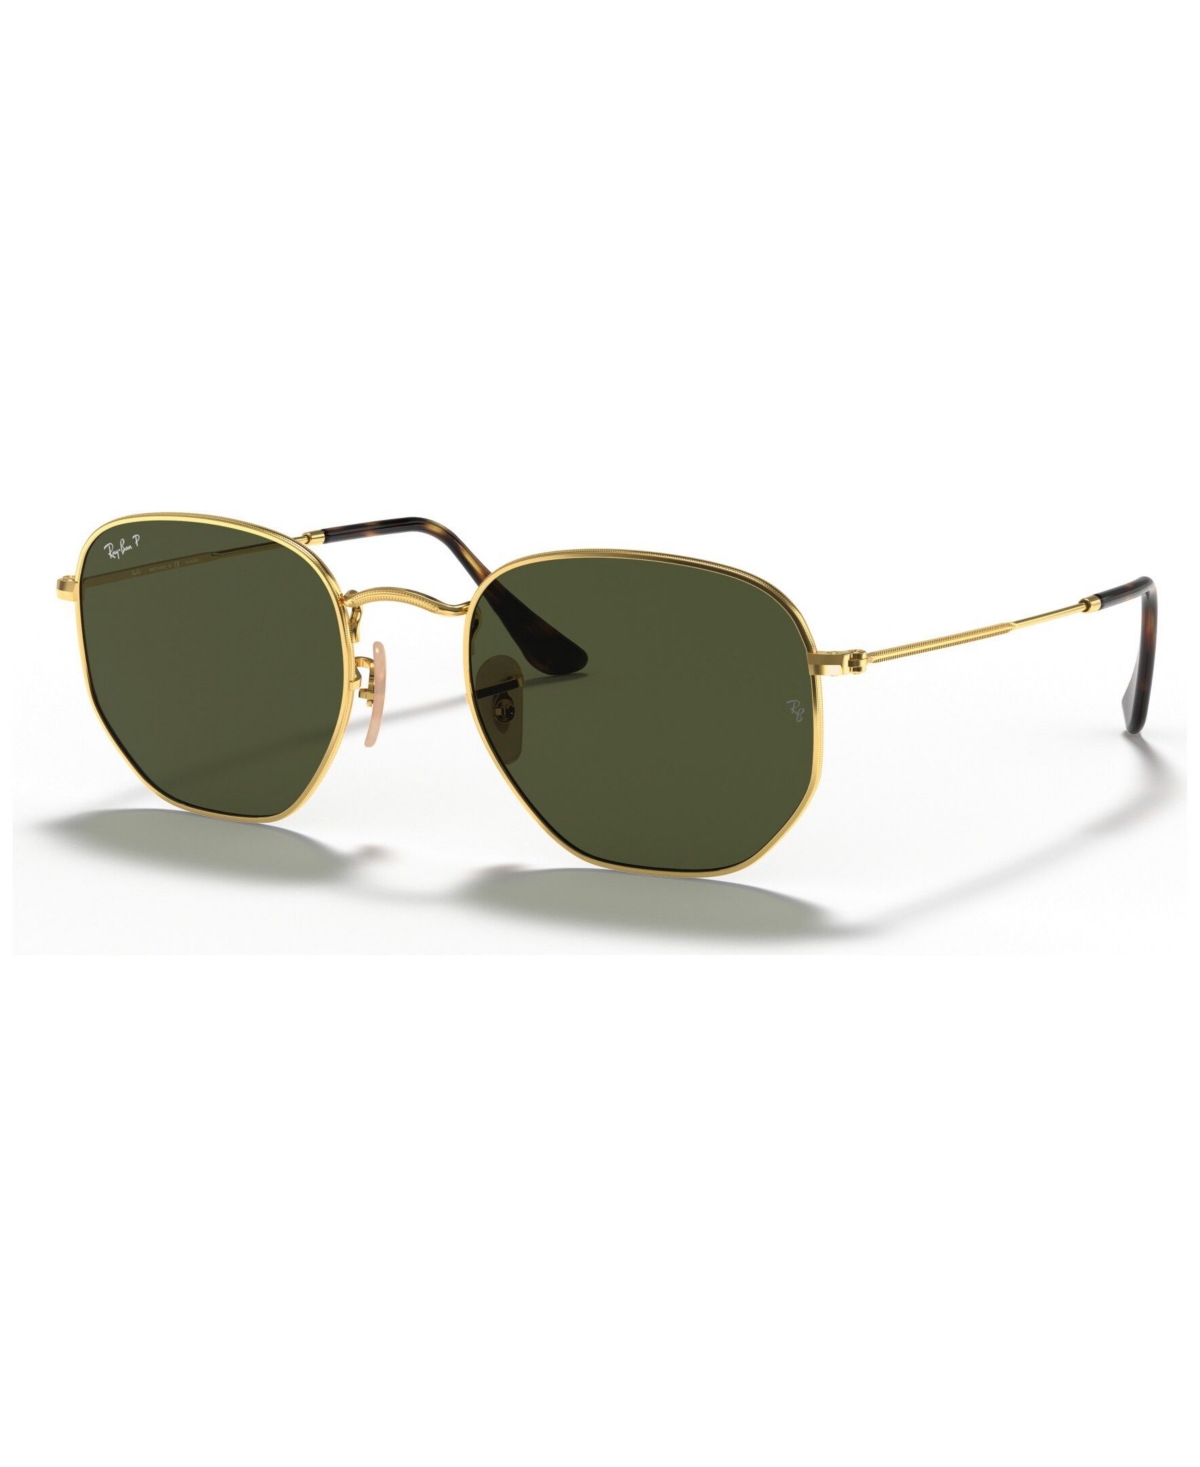 Ray Ban Unisex Polarized Sunglasses, Rb3548n Hexagonal Washed Evolve In Gold,green Polar